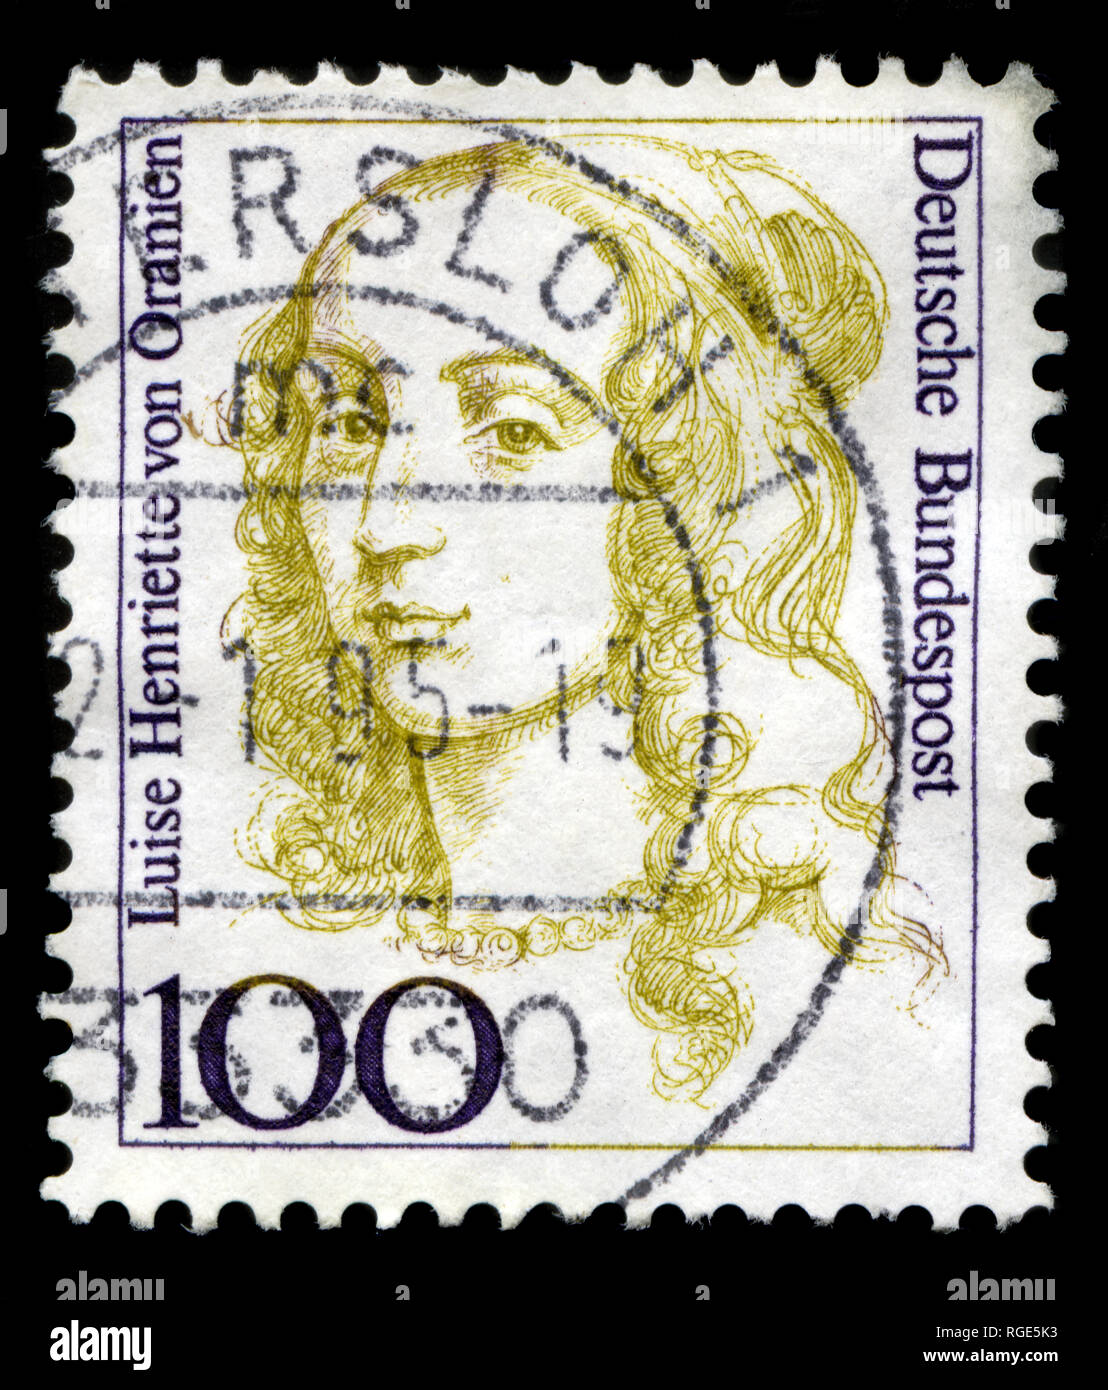 Postage stamp from the Federal Republic of Germany in the Women in German History series issued in 1994 Stock Photo